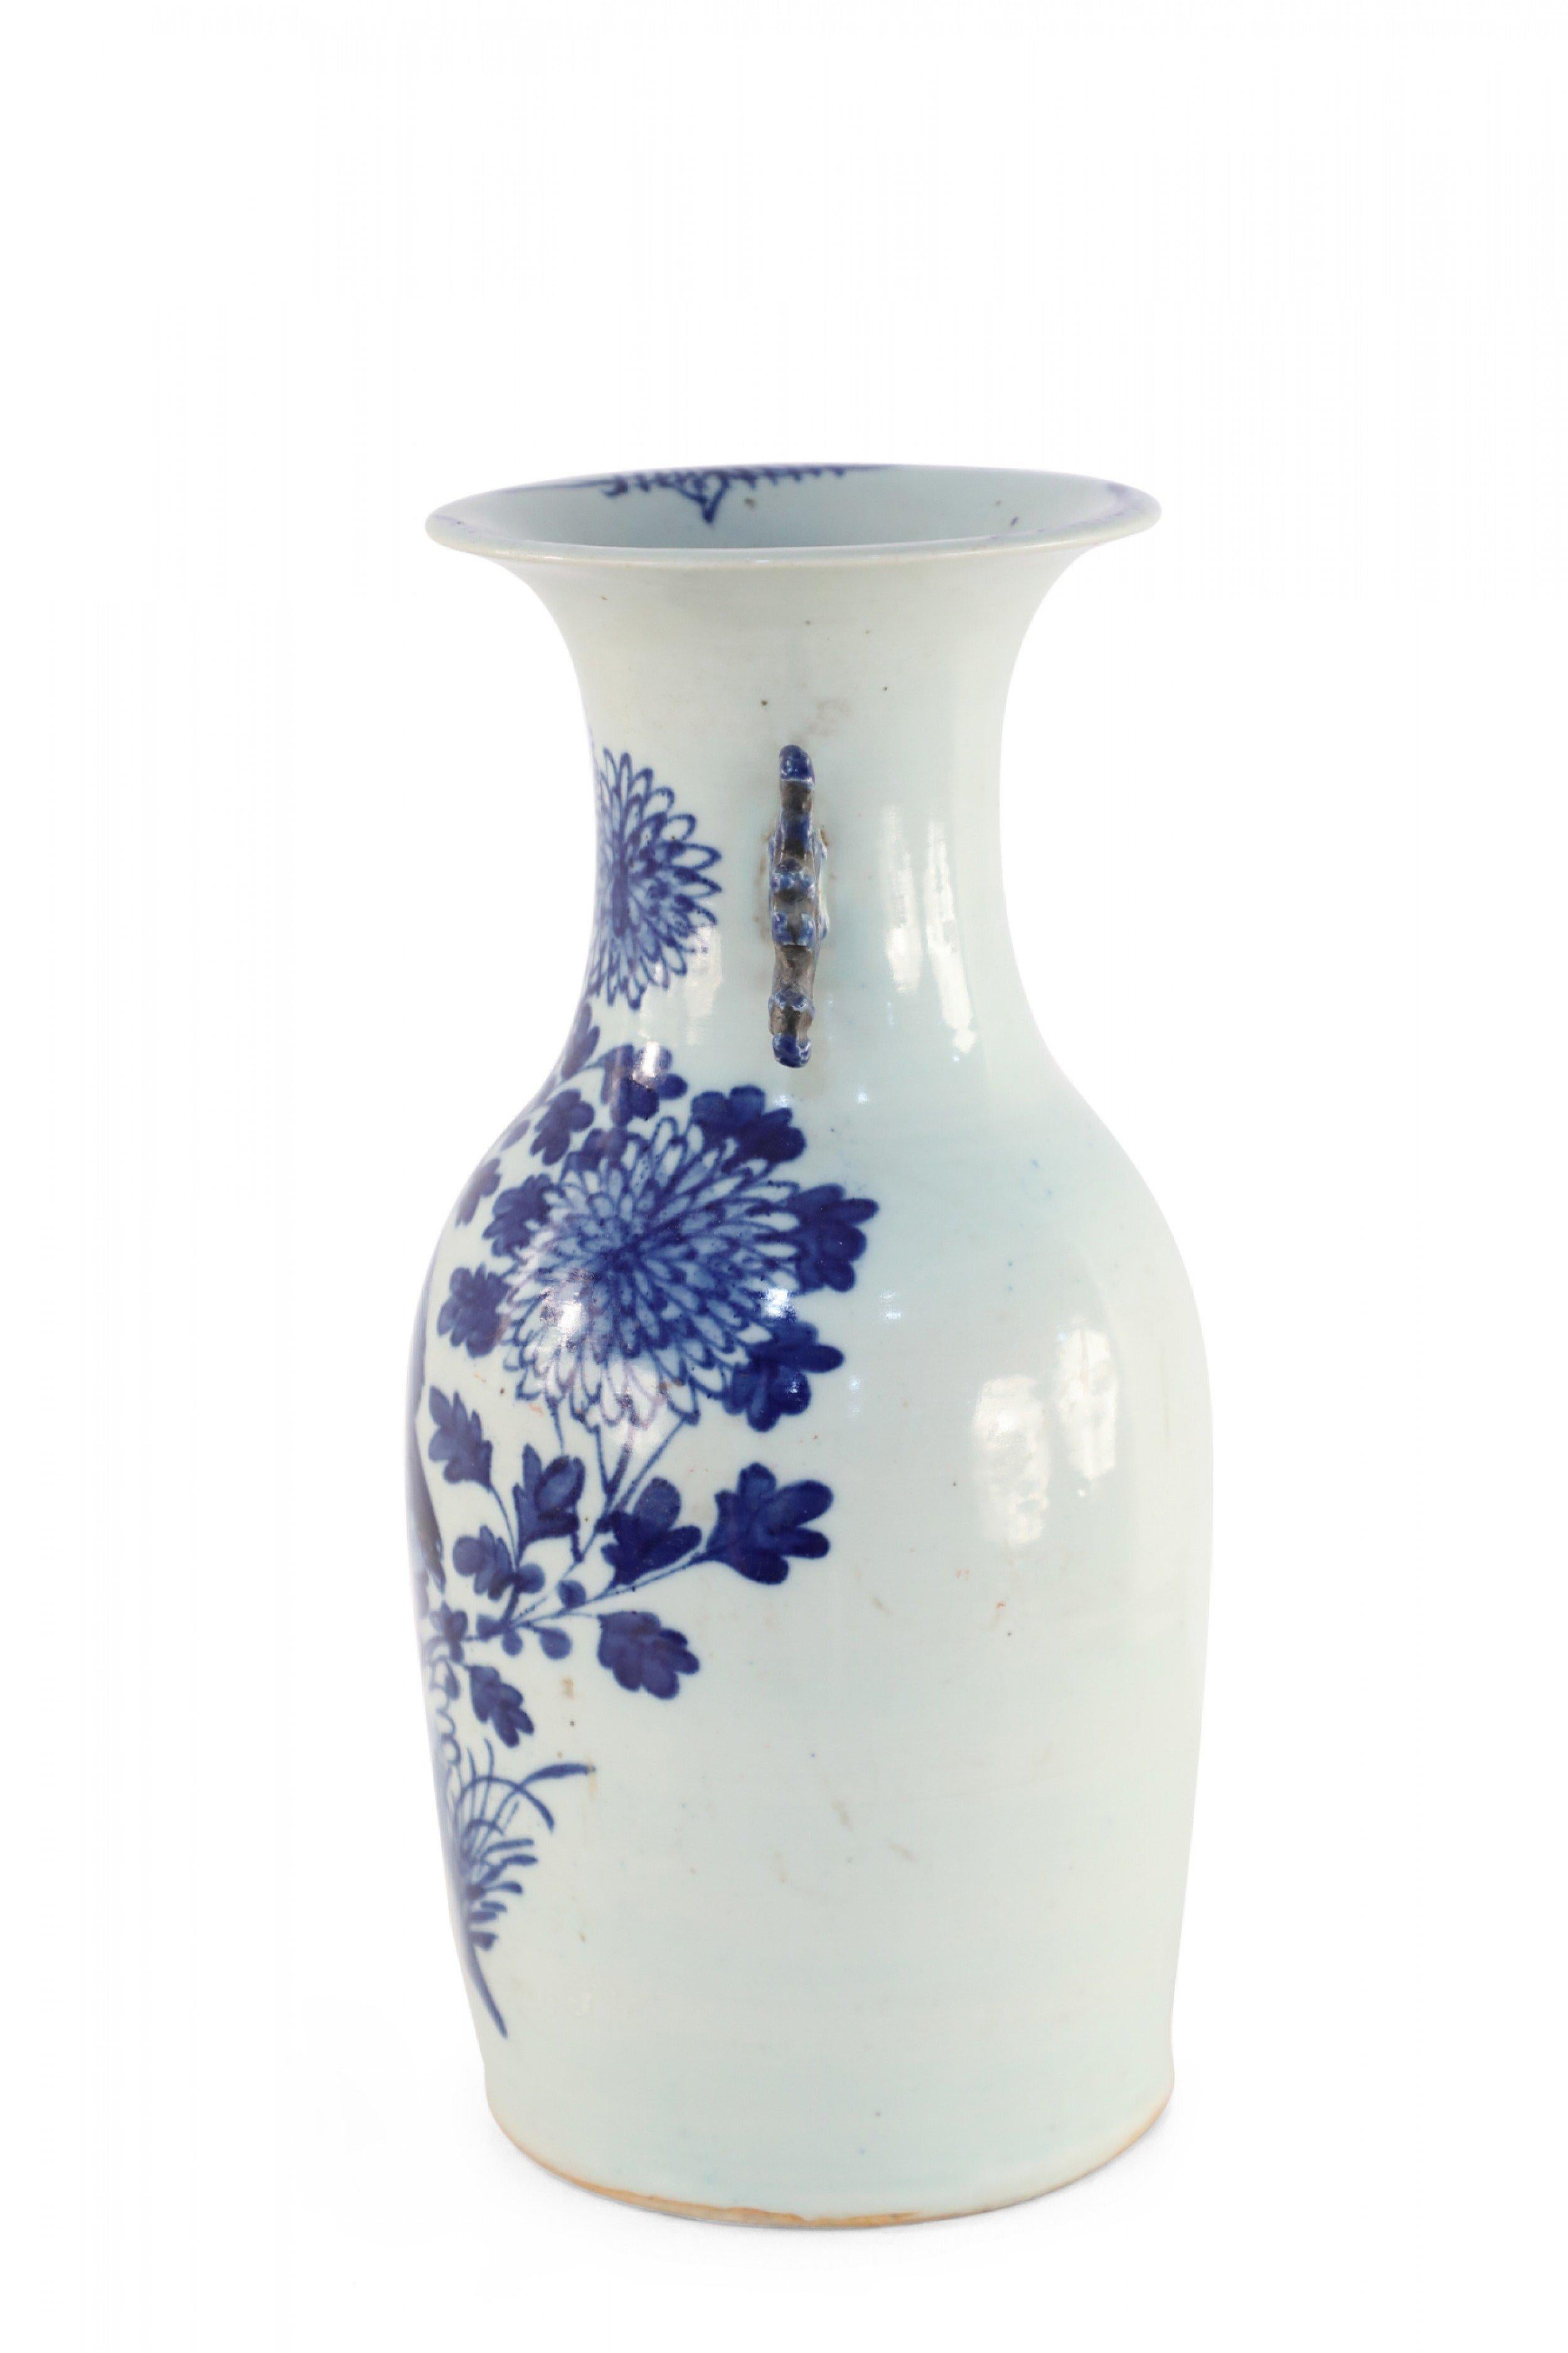 Antique Chinese (Late 19th Century) white and blue porcelain urn decorated with a bird amid flowering chrysanthemums, and accented with two navy scrolled handles along the neck.
 